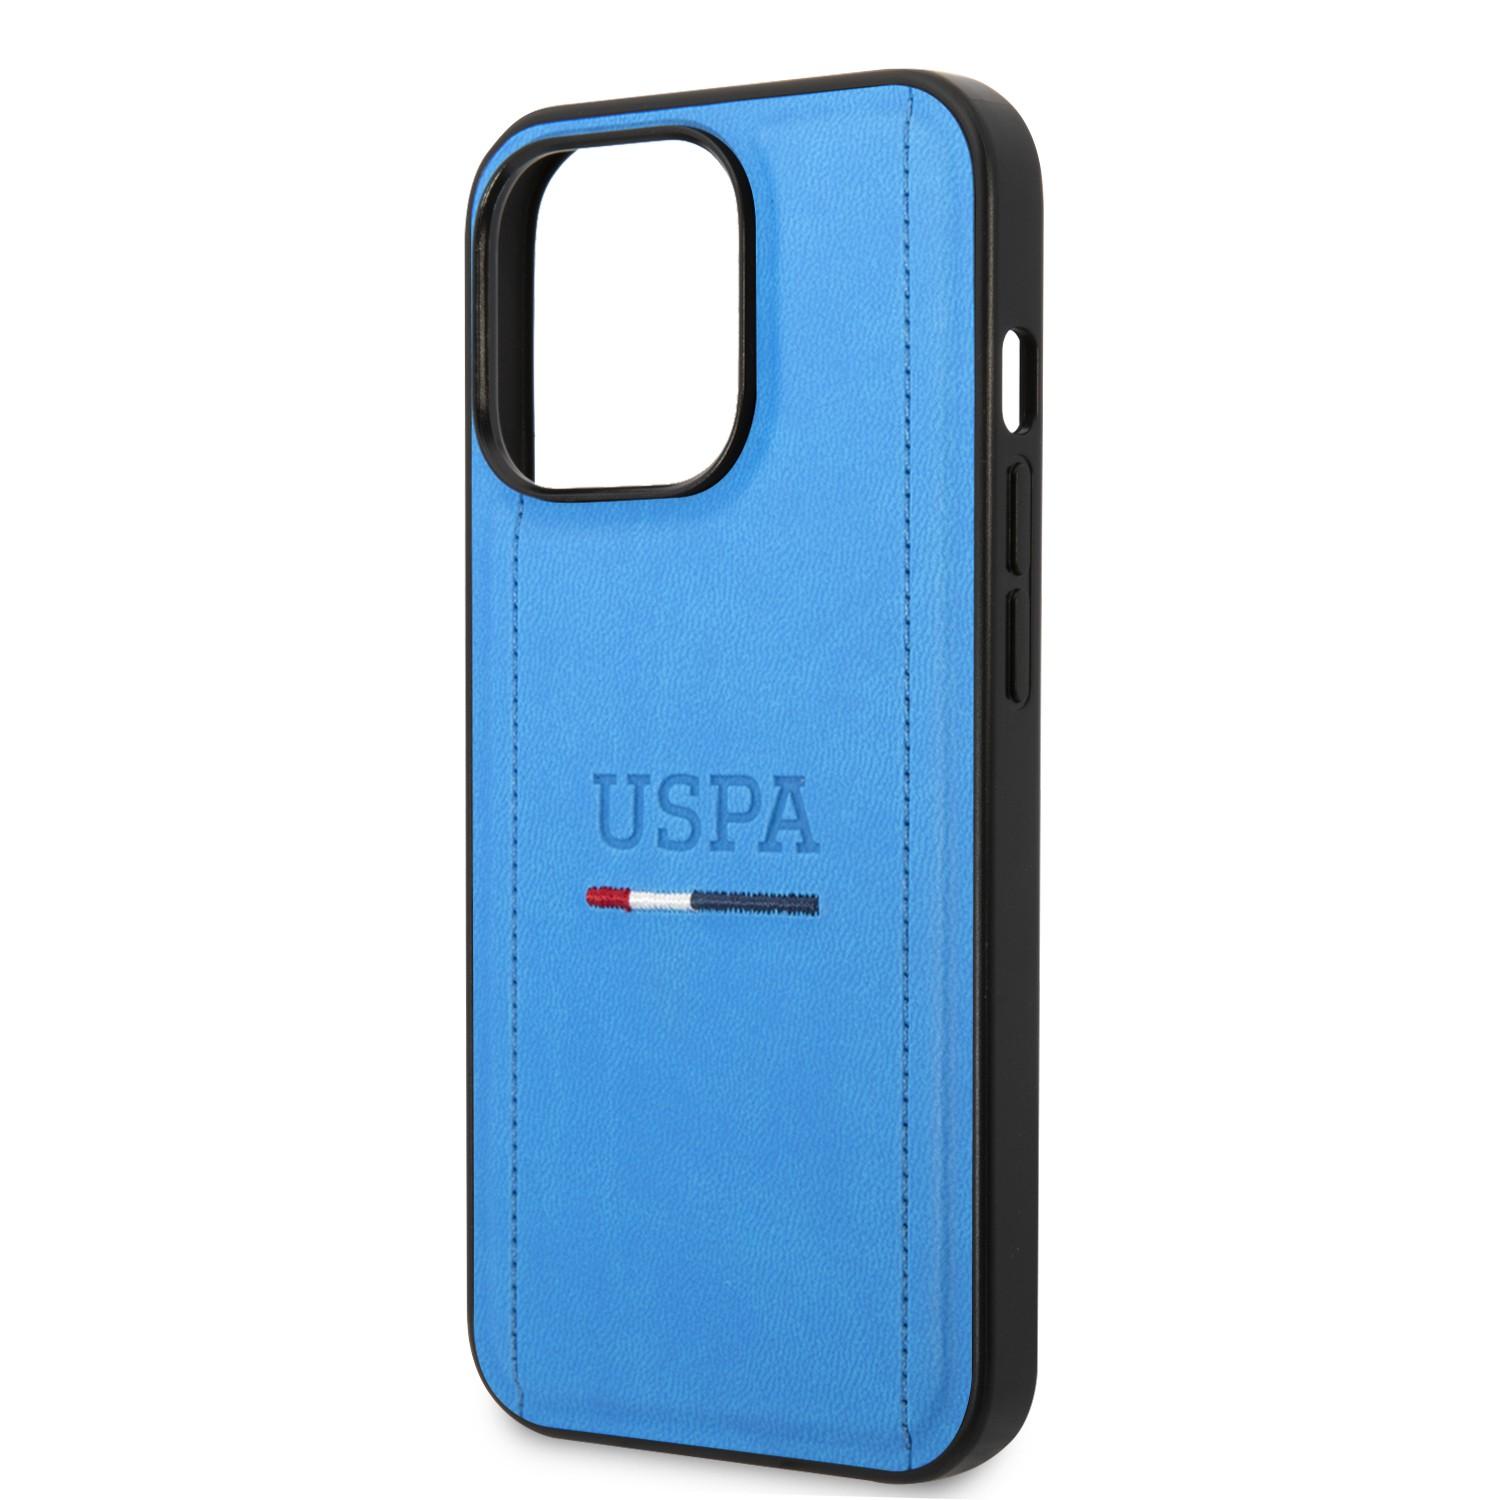 U.S.Polo Assn. USPA PU Leather Case With Tricolor Stitches & Initials For iPhone 14 Pro - Blue [ USHCP14LPINB ]